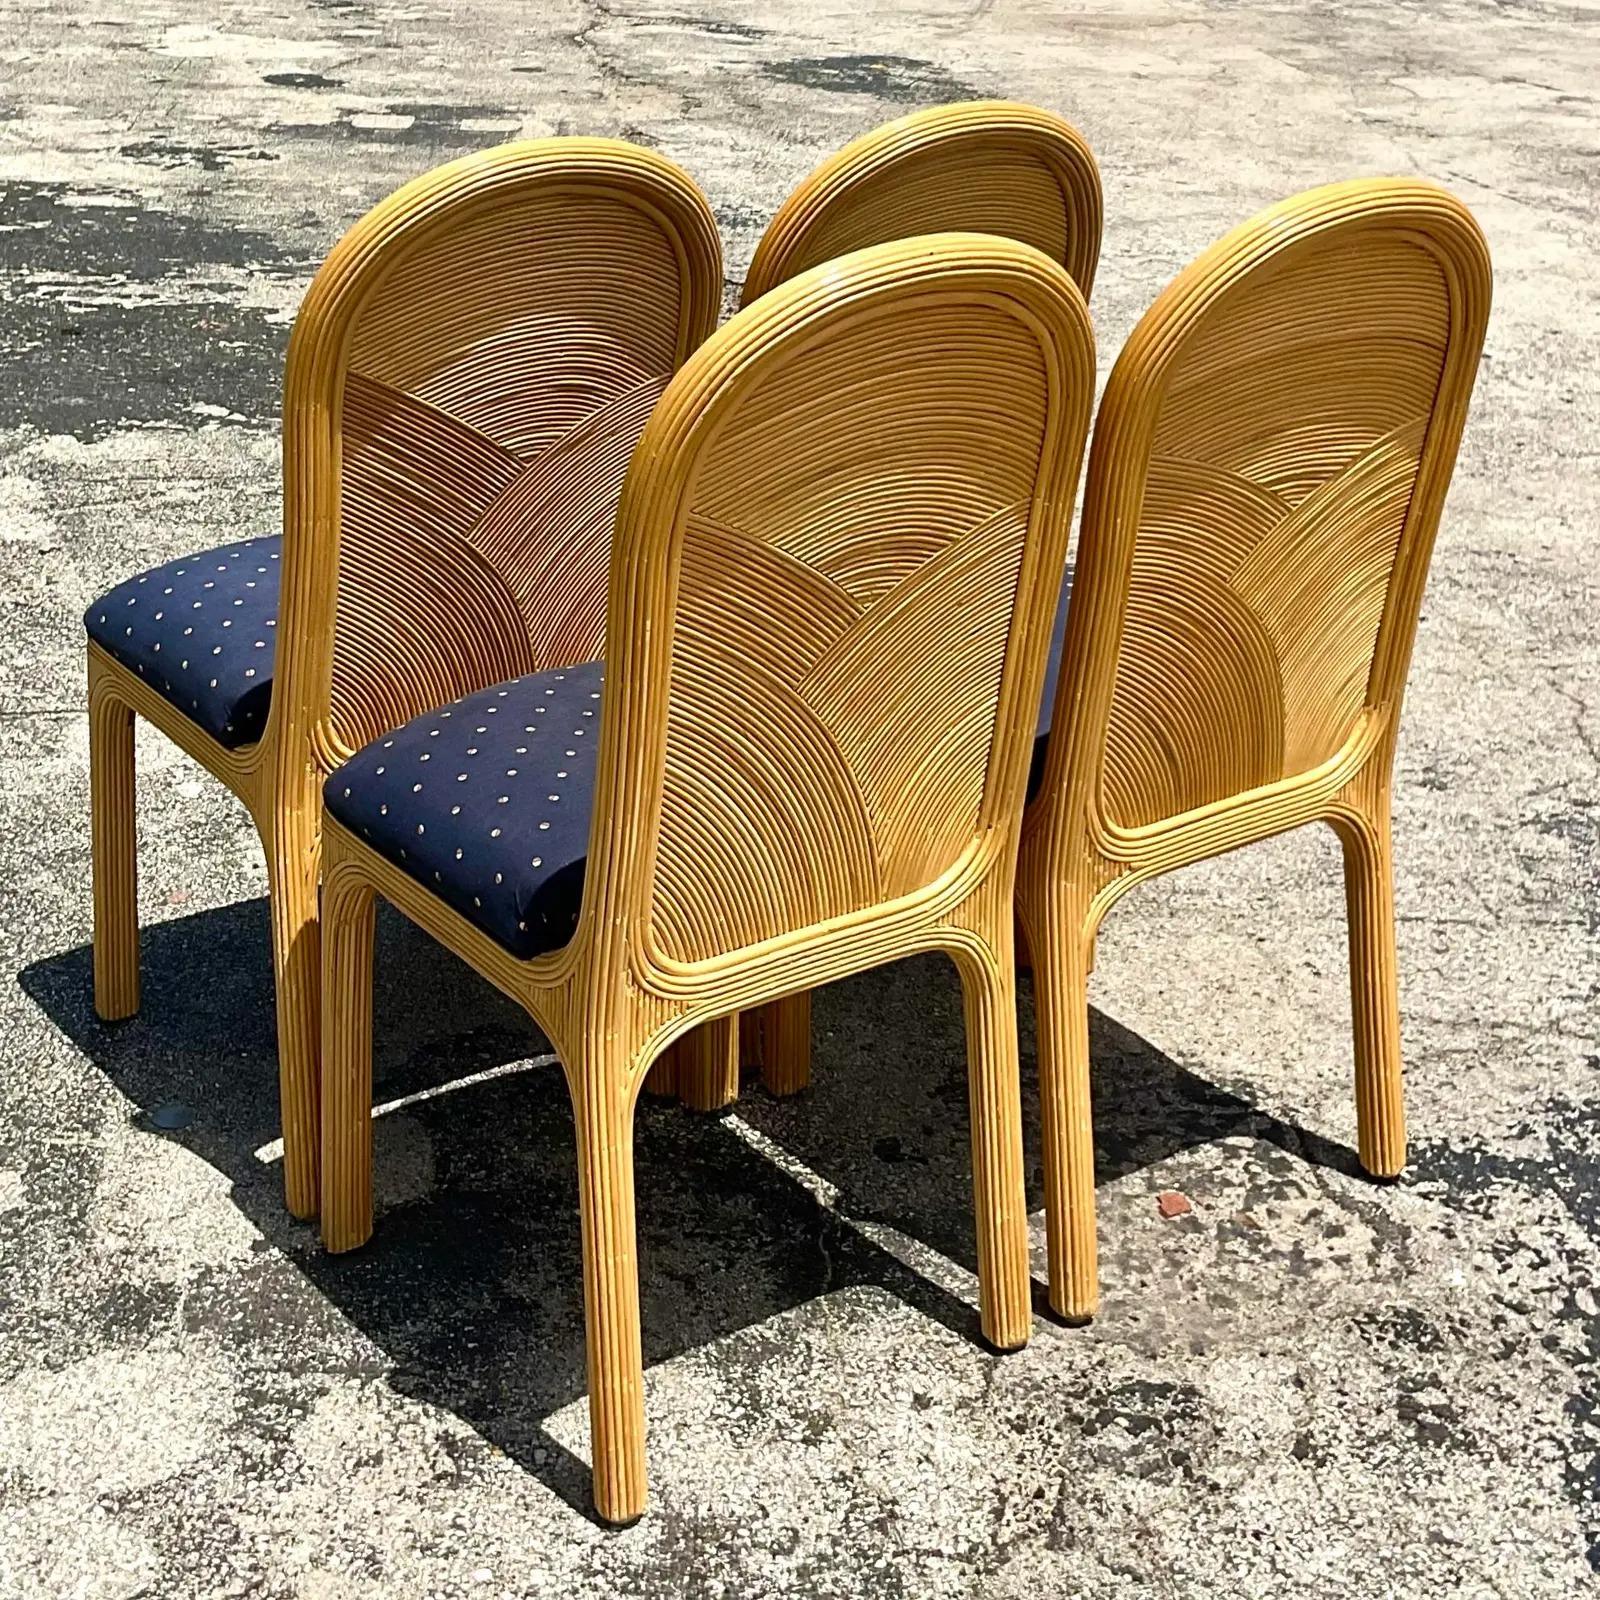 Fantastic set of four vintage Coastal dining chairs. Beautiful arched pencil reed design. Four additional chairs with different upholstery also available. Acquired from a Palm Beach estate.